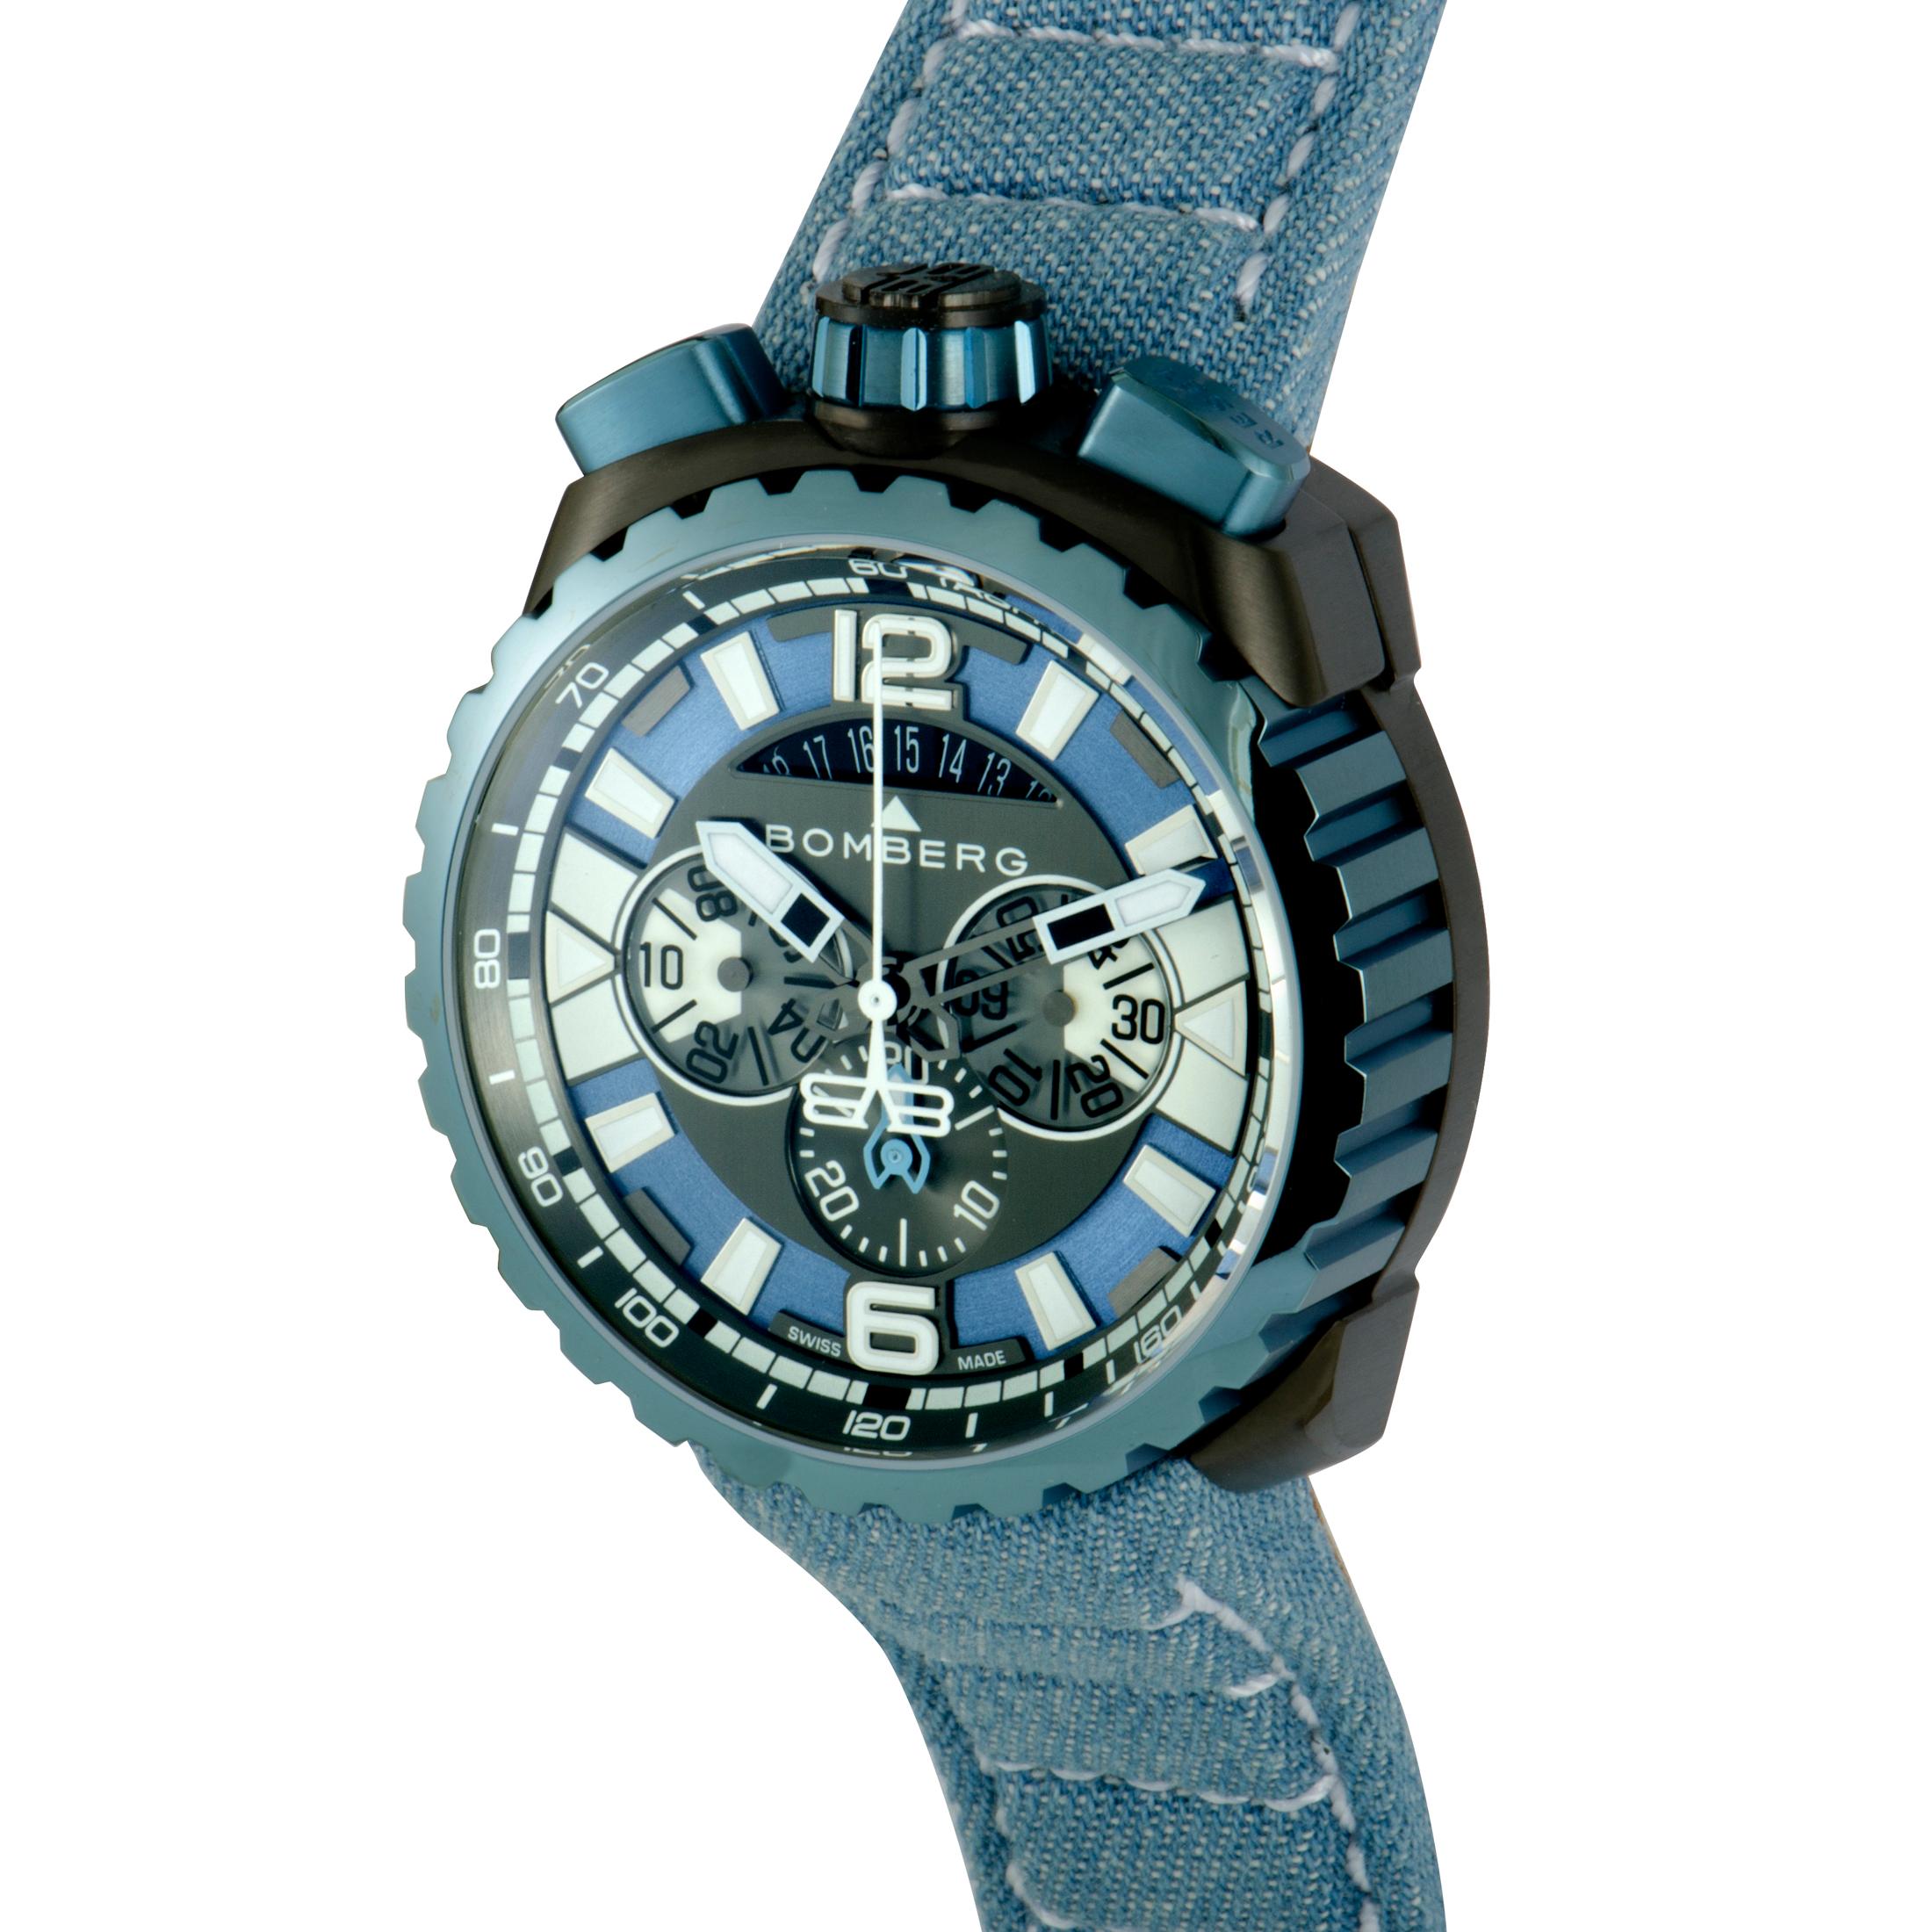 This is the Bomberg Bolt-68, reference number BS45CHPBLGM.050.

It boasts a 45 mm stainless steel case that is coated in gray and blue PVD. Powered by a quartz movement, the watch features the following functions – hours, minutes, chronograph,